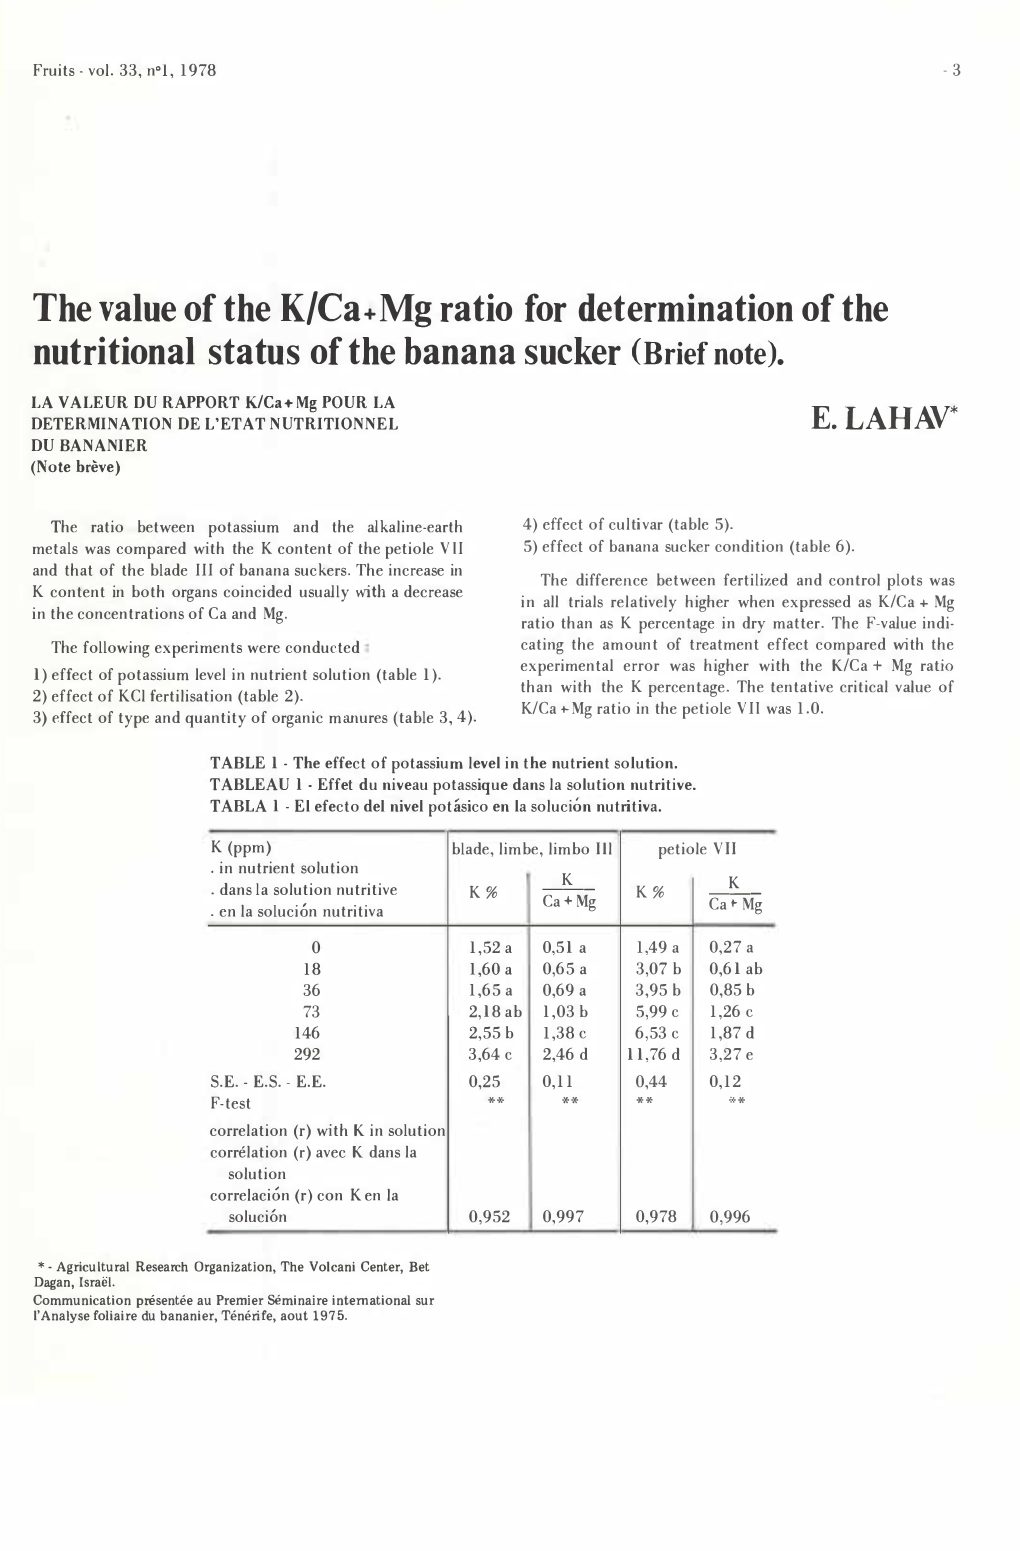 The Value of the K/Ca+ Mg Ratio for Determination of the Nutritional Status of the Banana Sucker (Brief Note)